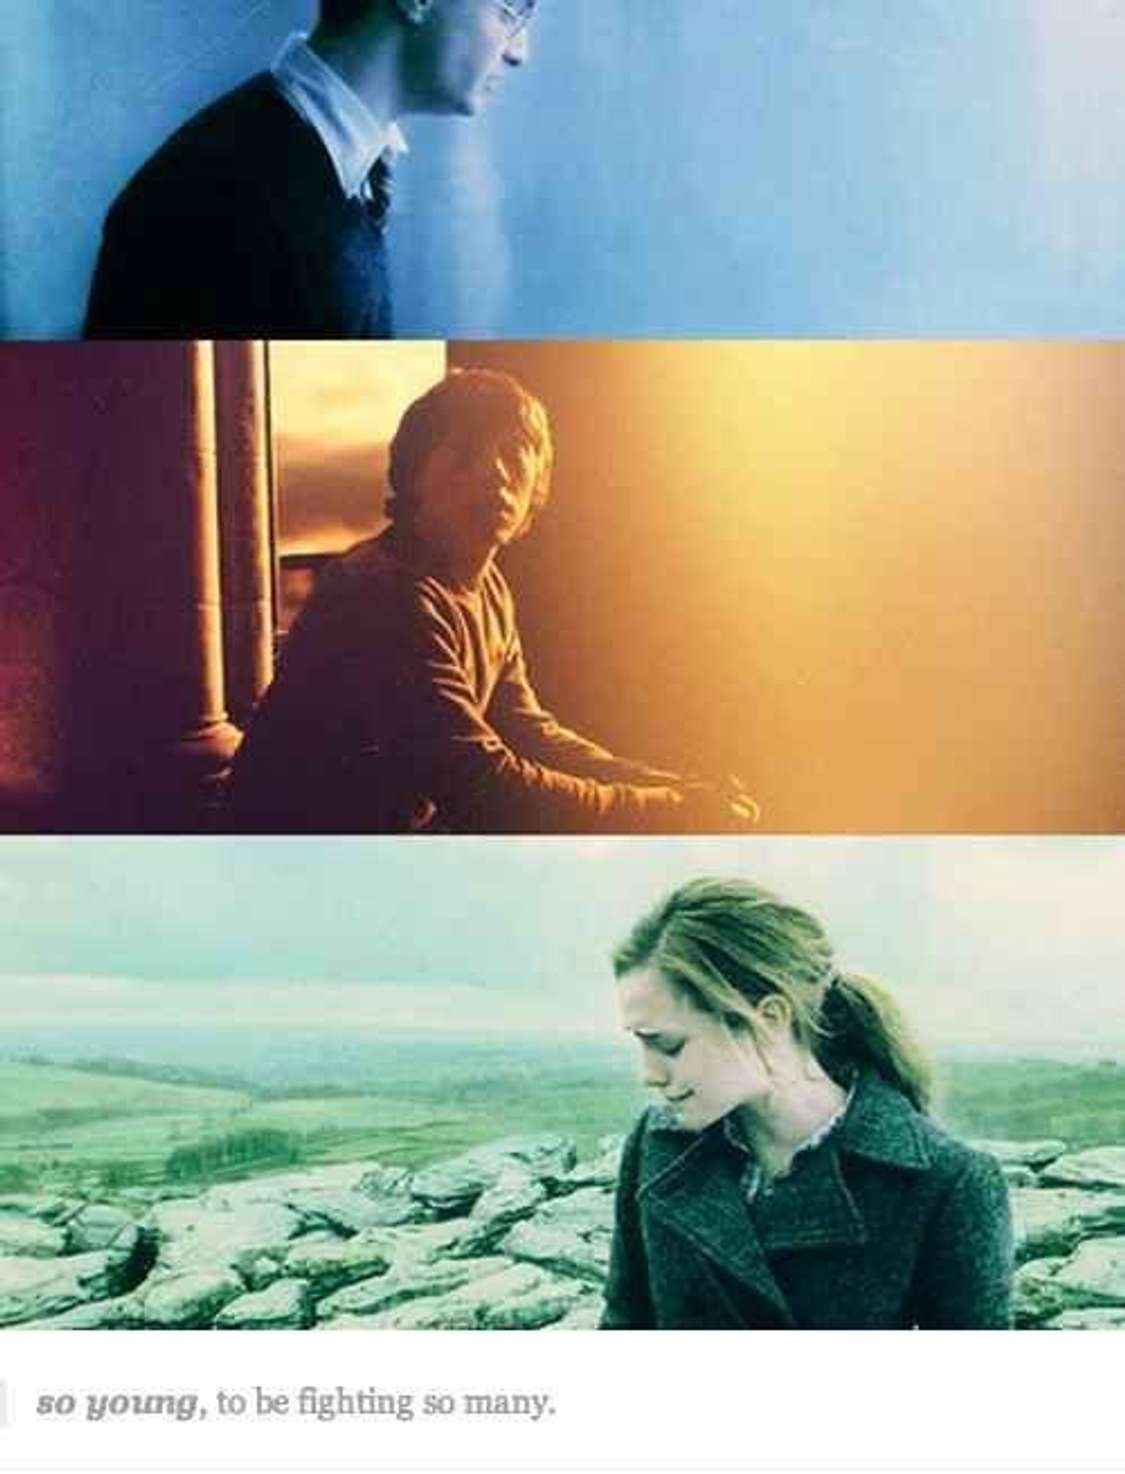 Harry Potter: Heartbreaking Facts About The Golden Trio You Never Knew